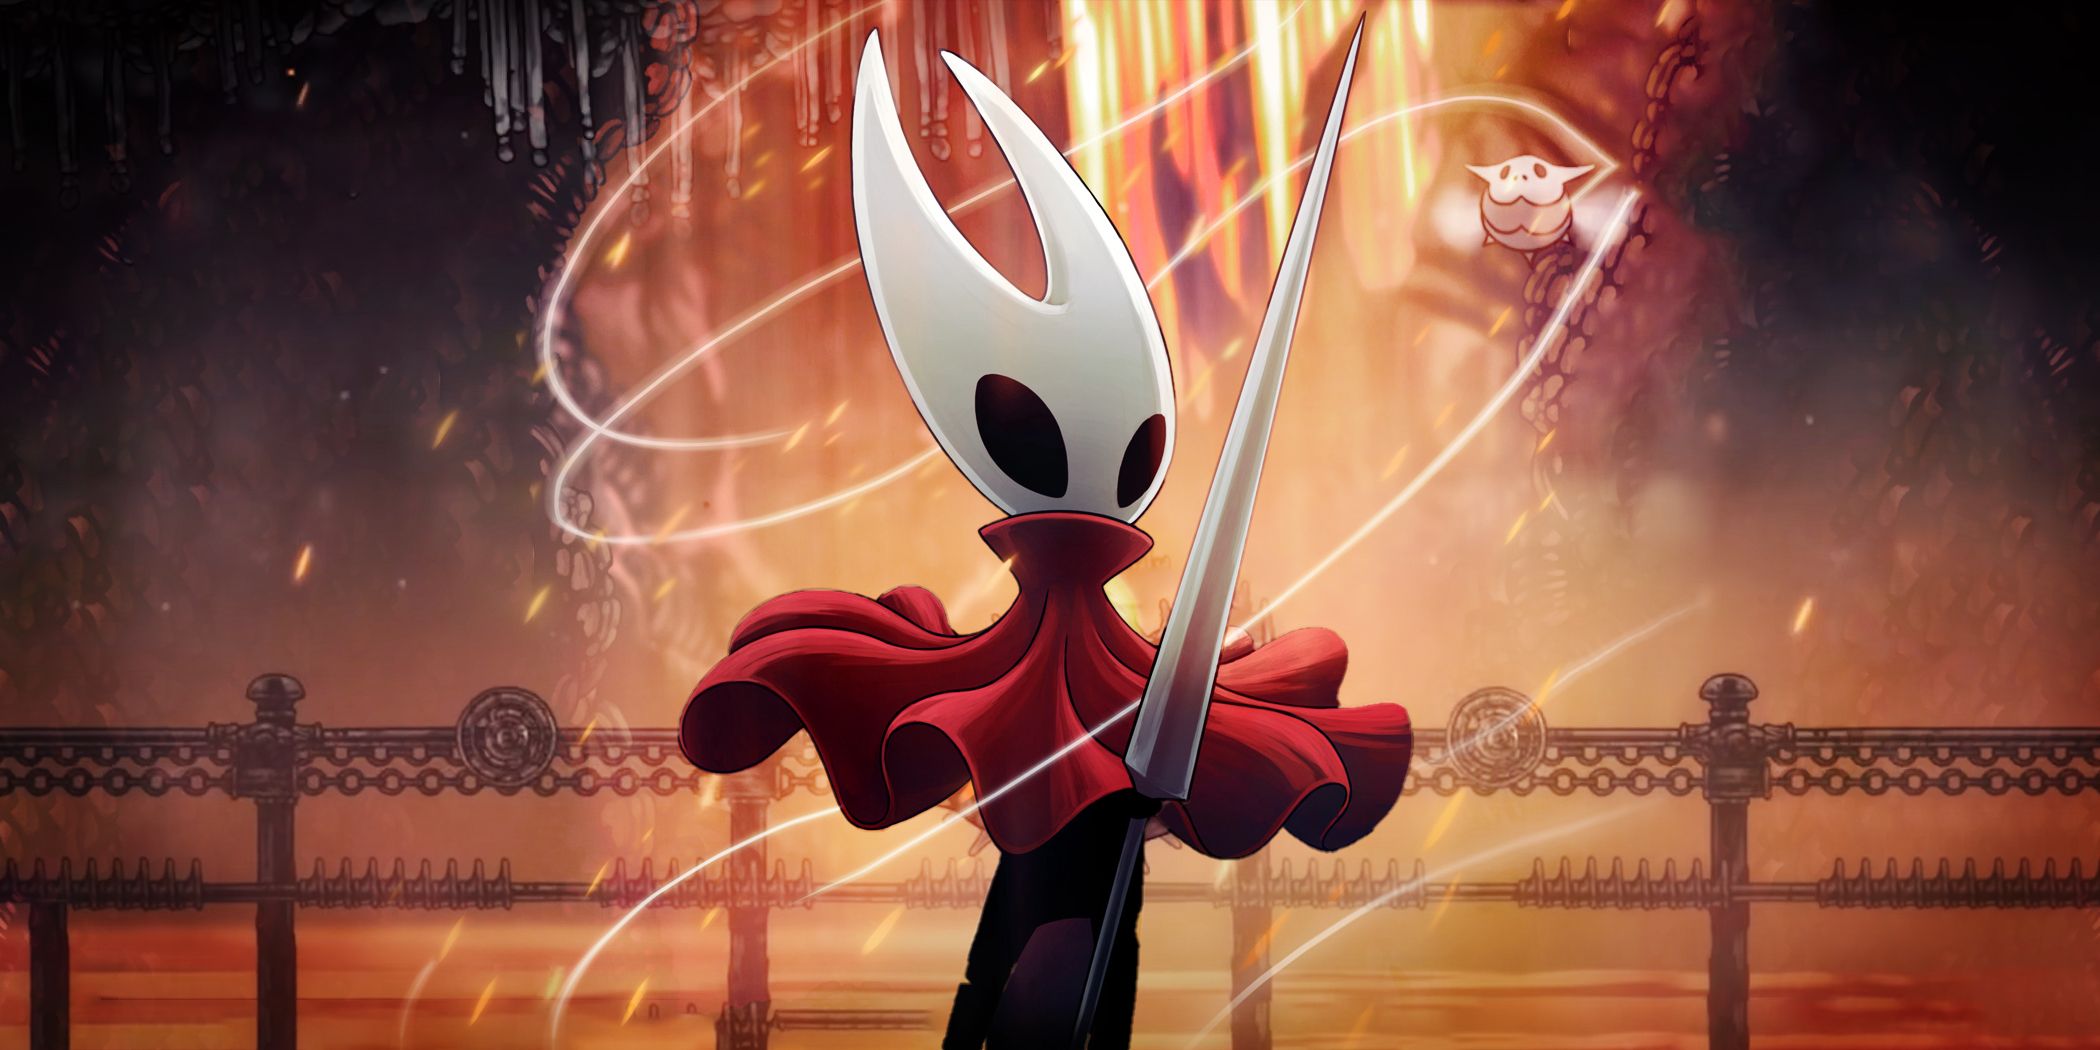 Hollow Knight: Silksong Gets Update That's More Worrying Than Reassuring